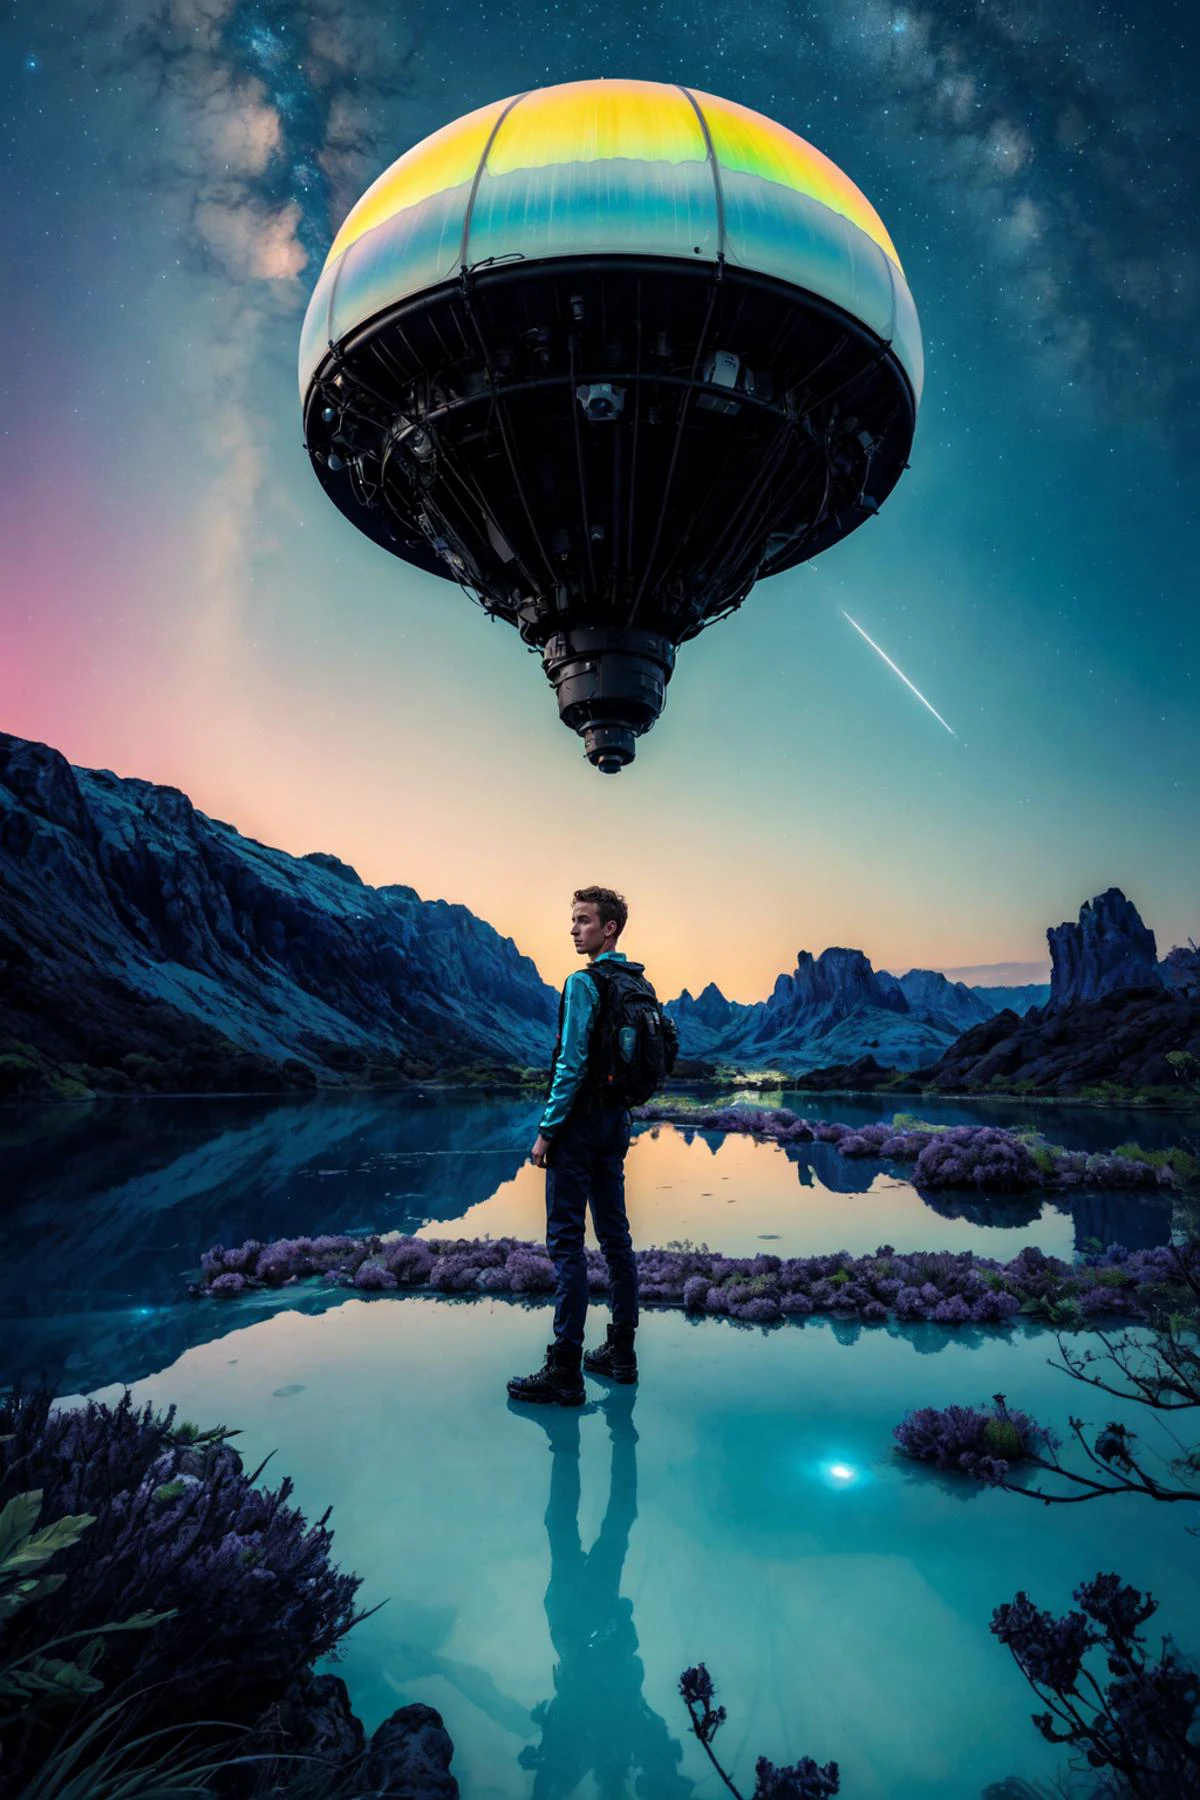 1boy, photograph, portrait, a handsome intrepid explorer standing on an alien planet's celestial oasis, surrounded by luminous flora, iridescent pools, and an otherworldly sky, capturing the sense of awe and discovery in an extraterrestrial landscape